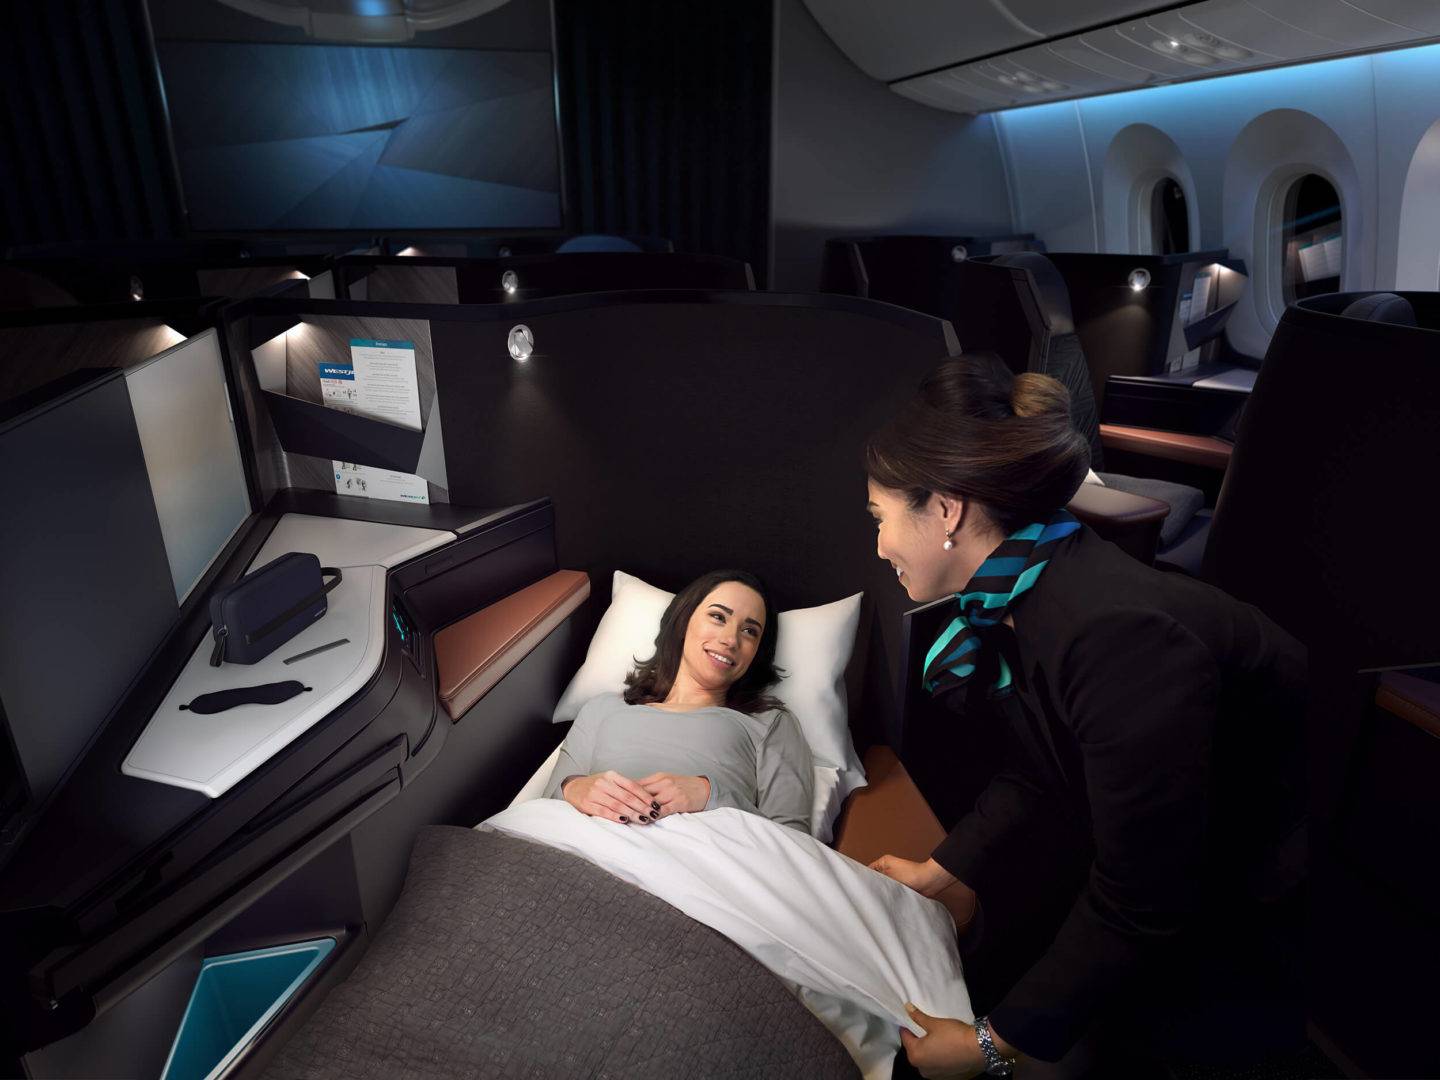 A passenger speaks to cabin crew while reclining in the WestJet Business Class seat in bed mode